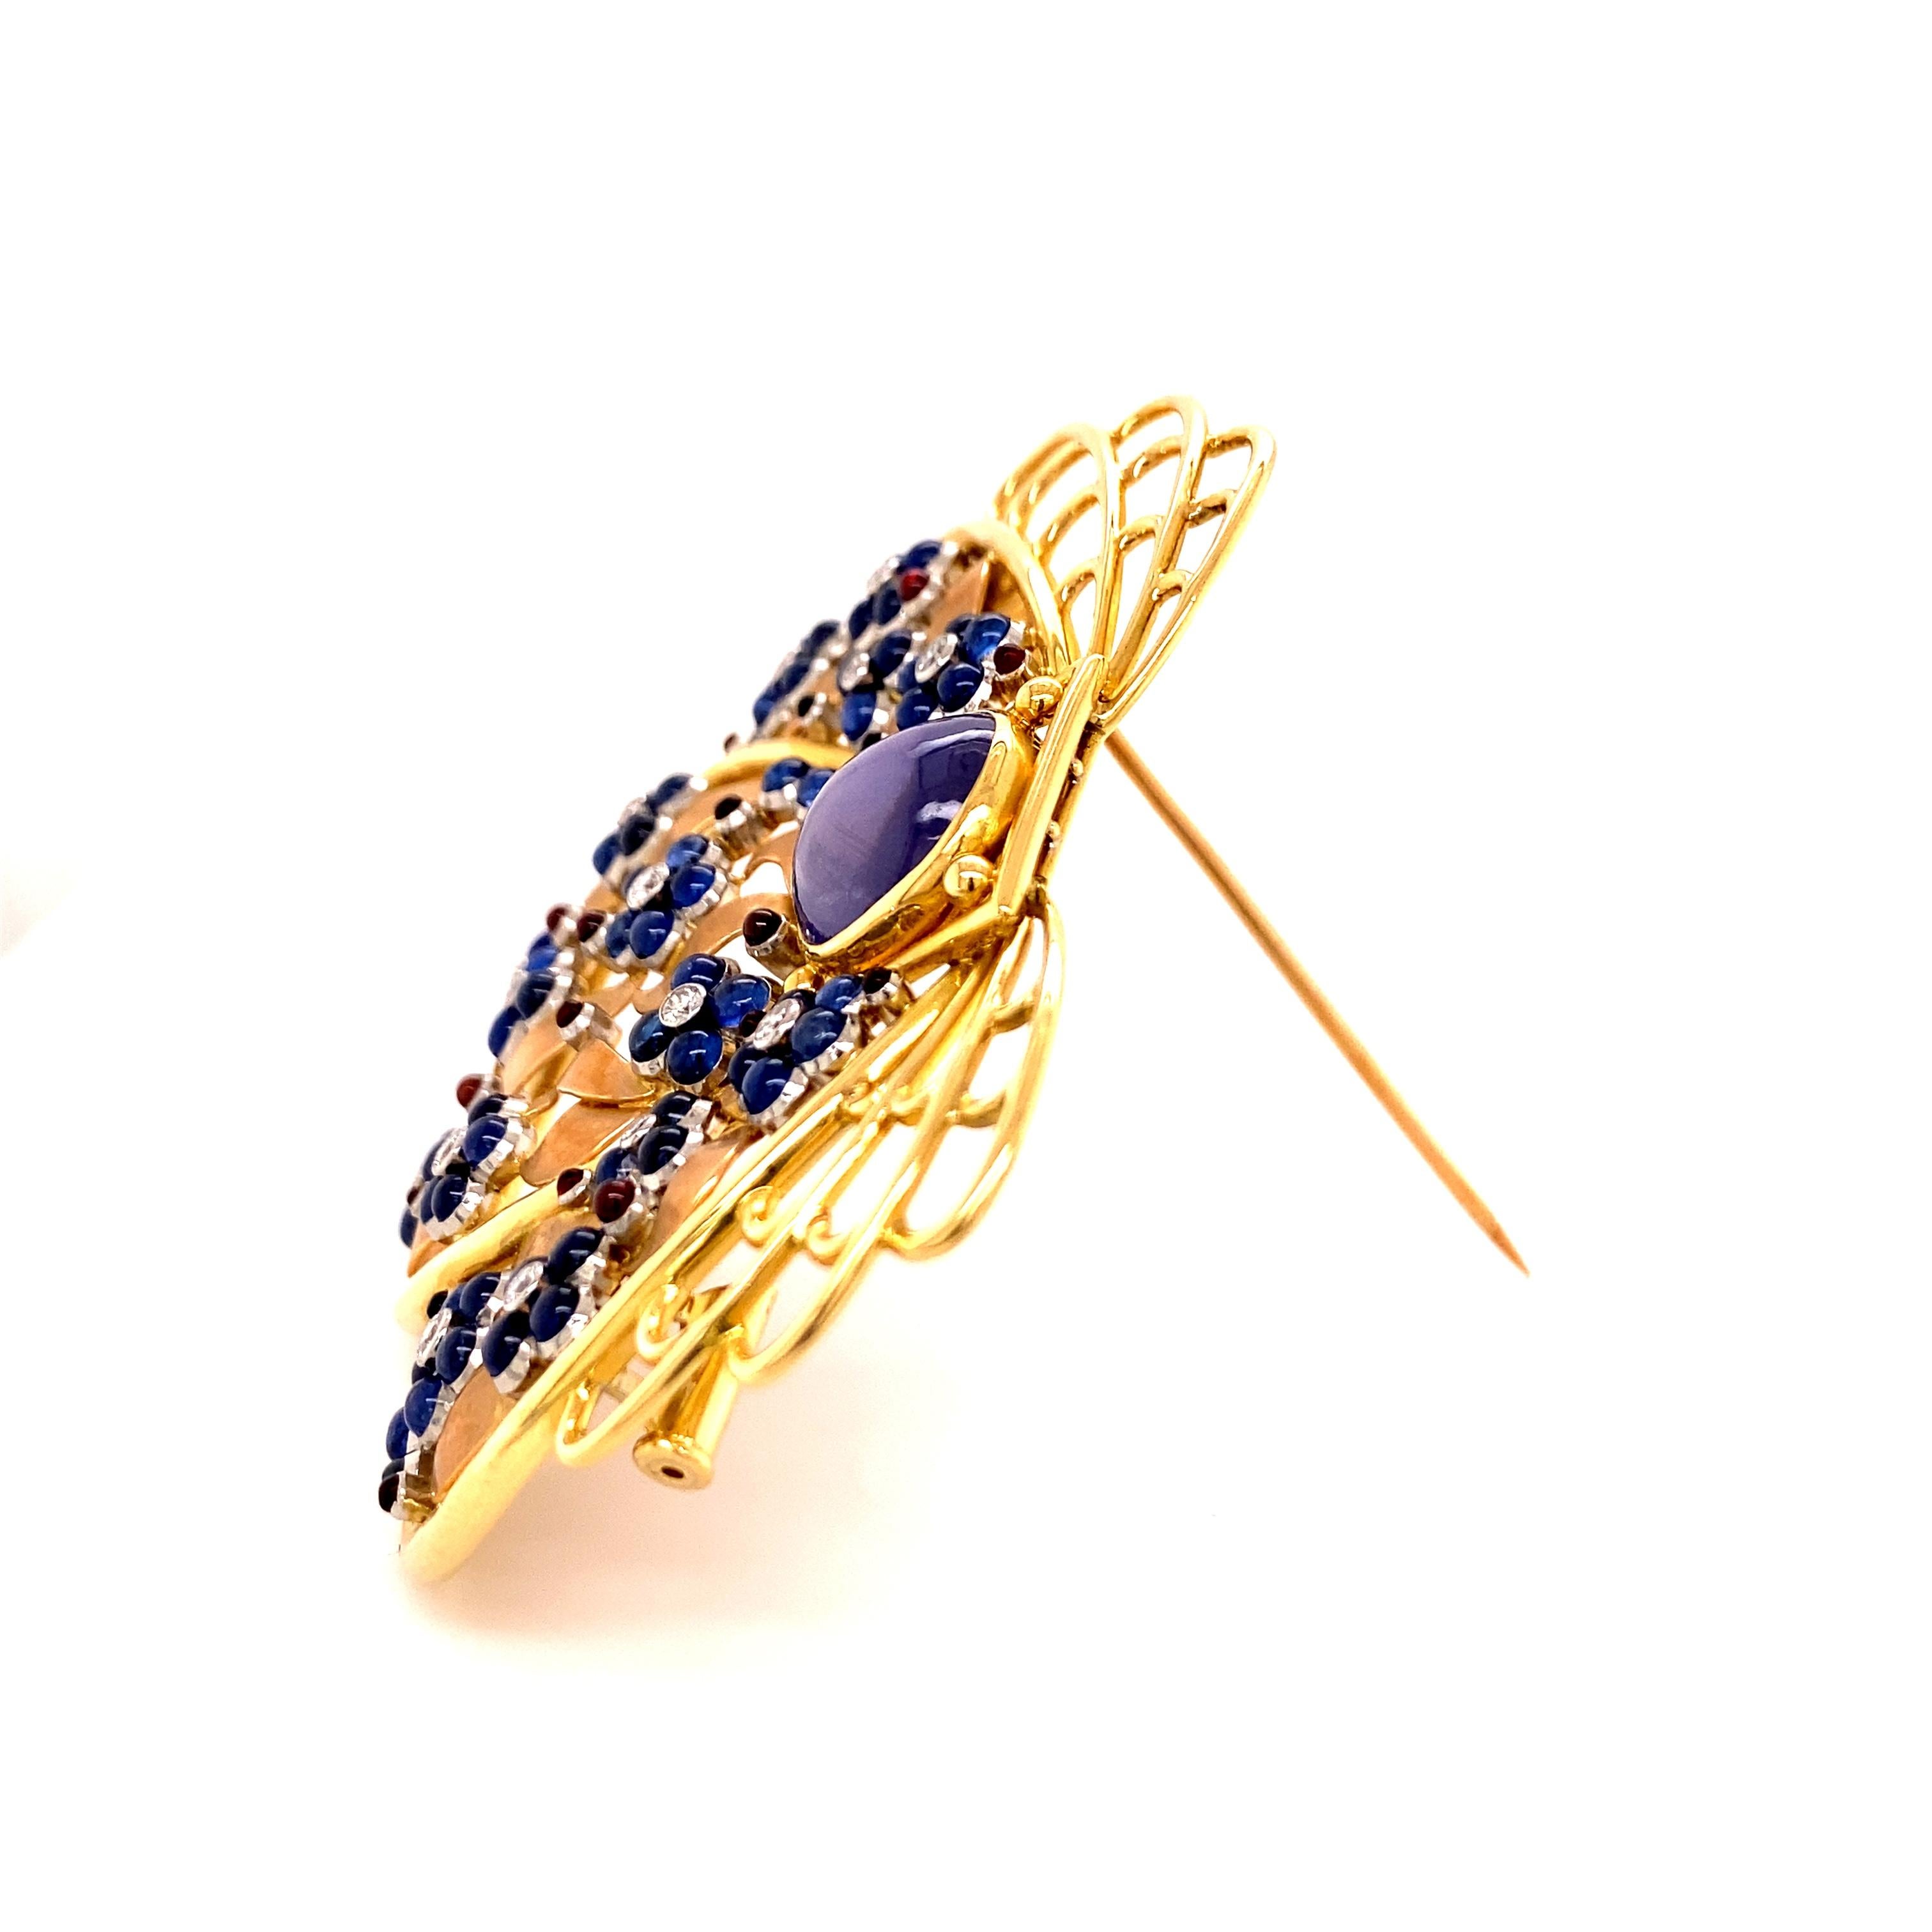 Cabochon Unique Sapphire and Diamond Brooch by Meister in 18 Karat Gold